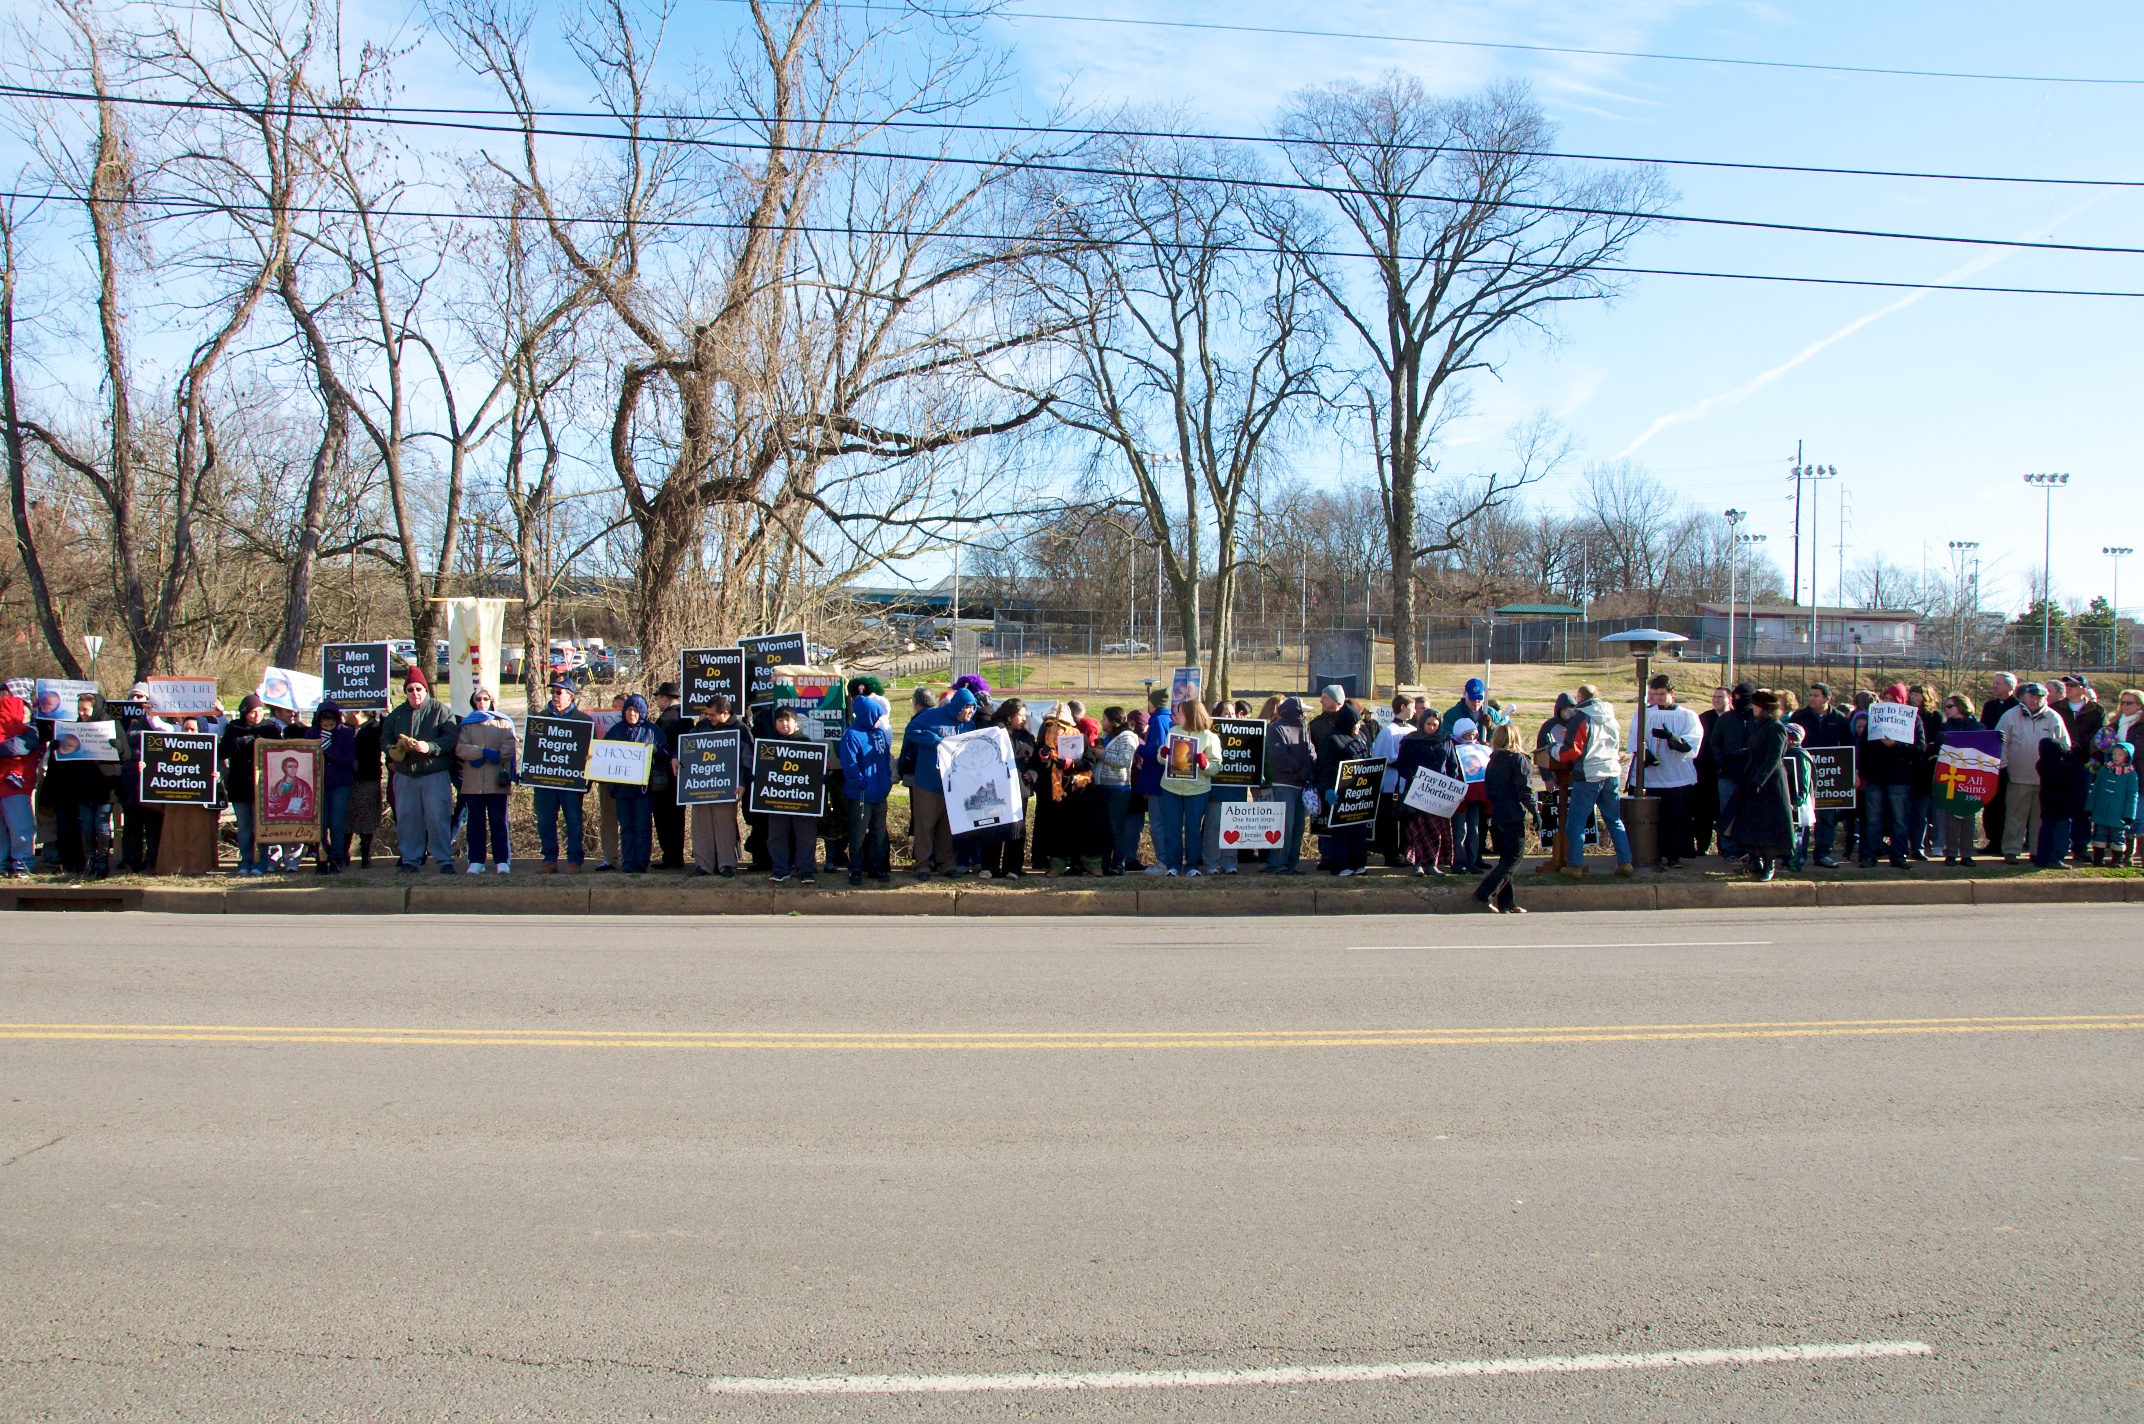 a group of people standing on the side of the road holding signs